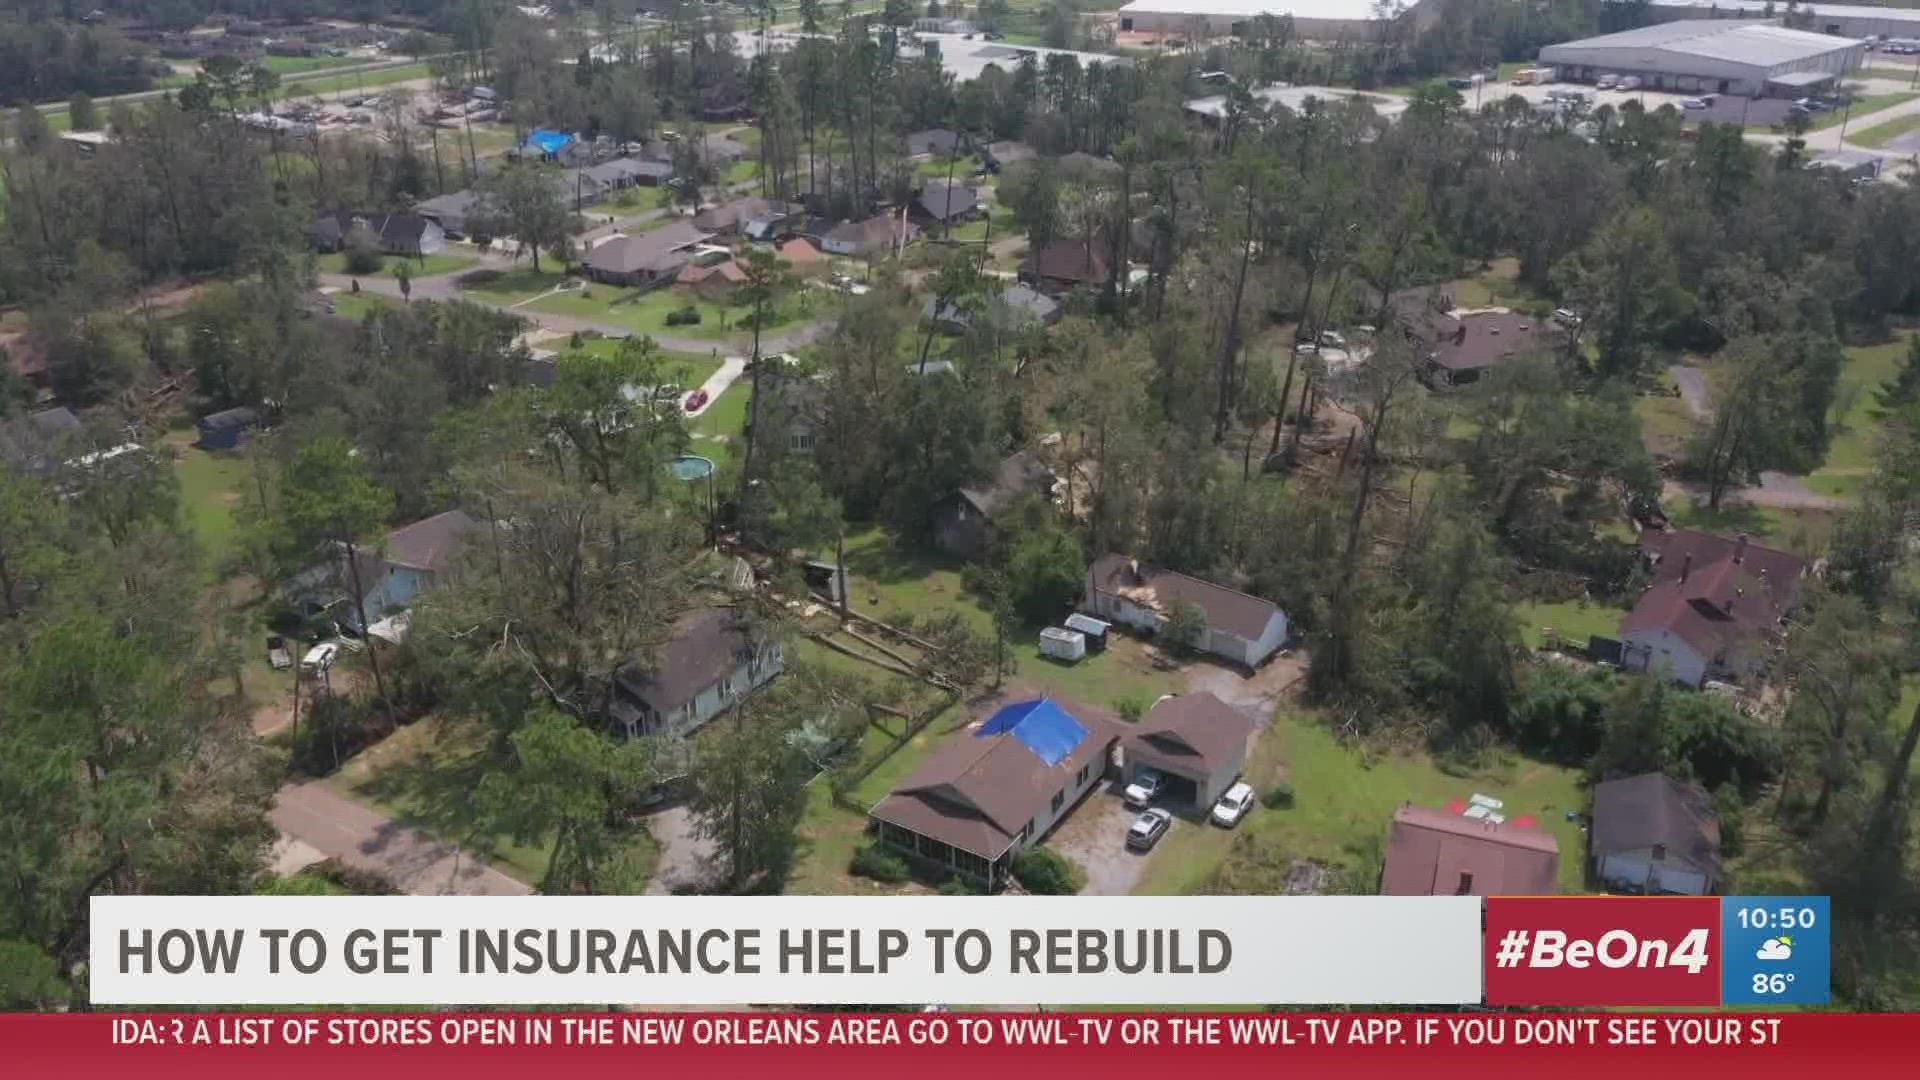 Jim Donelon, Louisiana's Insurance Comissioner, is telling folks how they can get their insurance companies to help pay for damage caused by Ida.